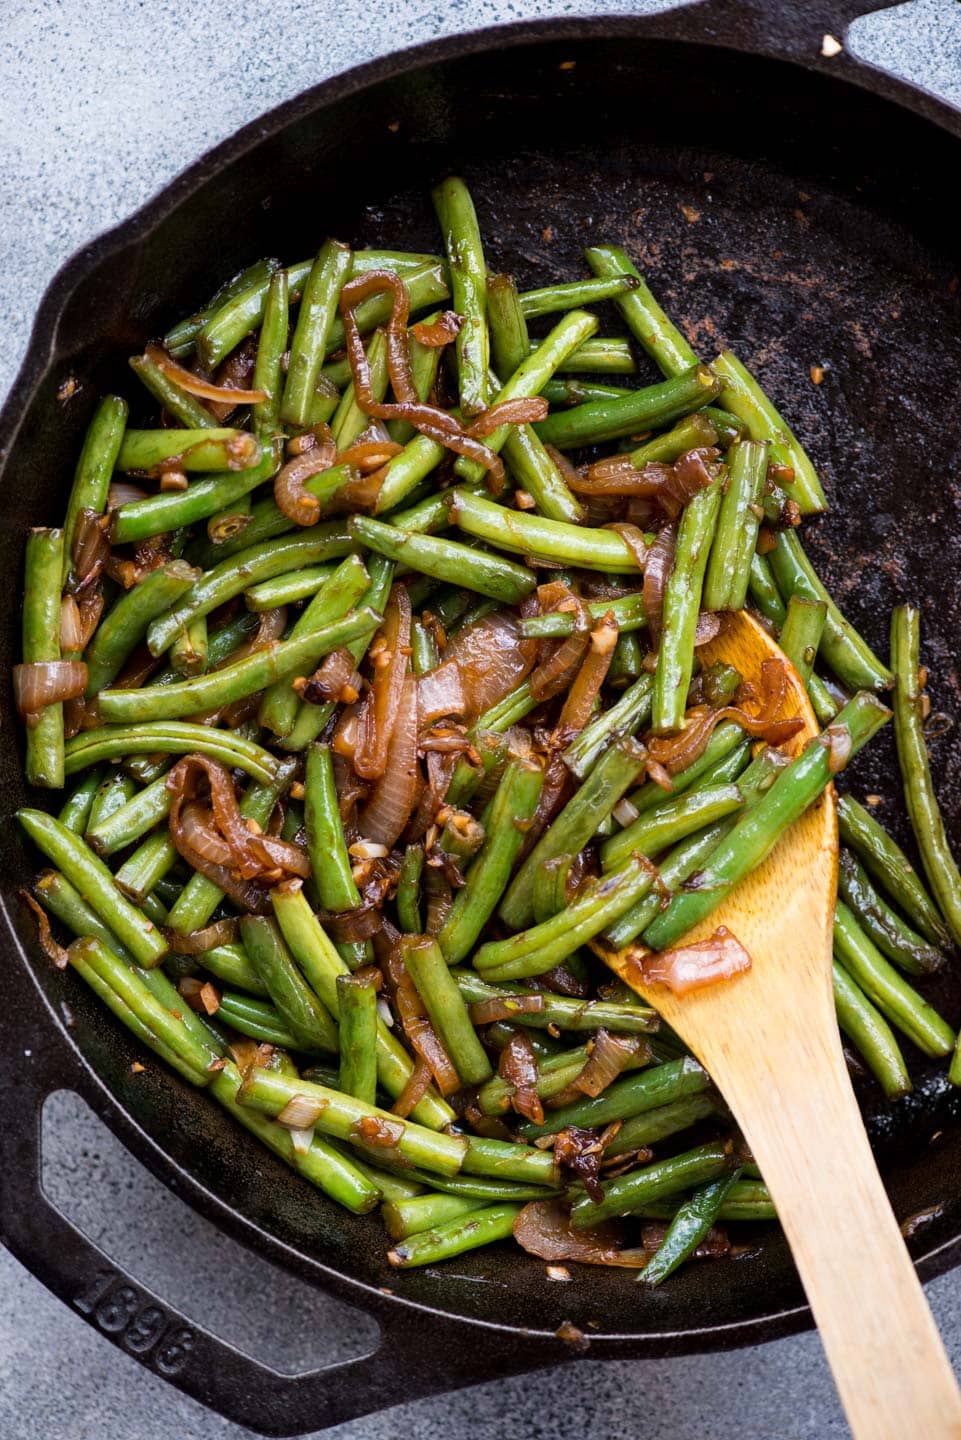 Asian Sauteed Green Beans with caramelized onion, garlic and a dash of soy sauce is an easy and versatile side dish. It takes only 20 minutes to make,the beans turn out tender and crispy.